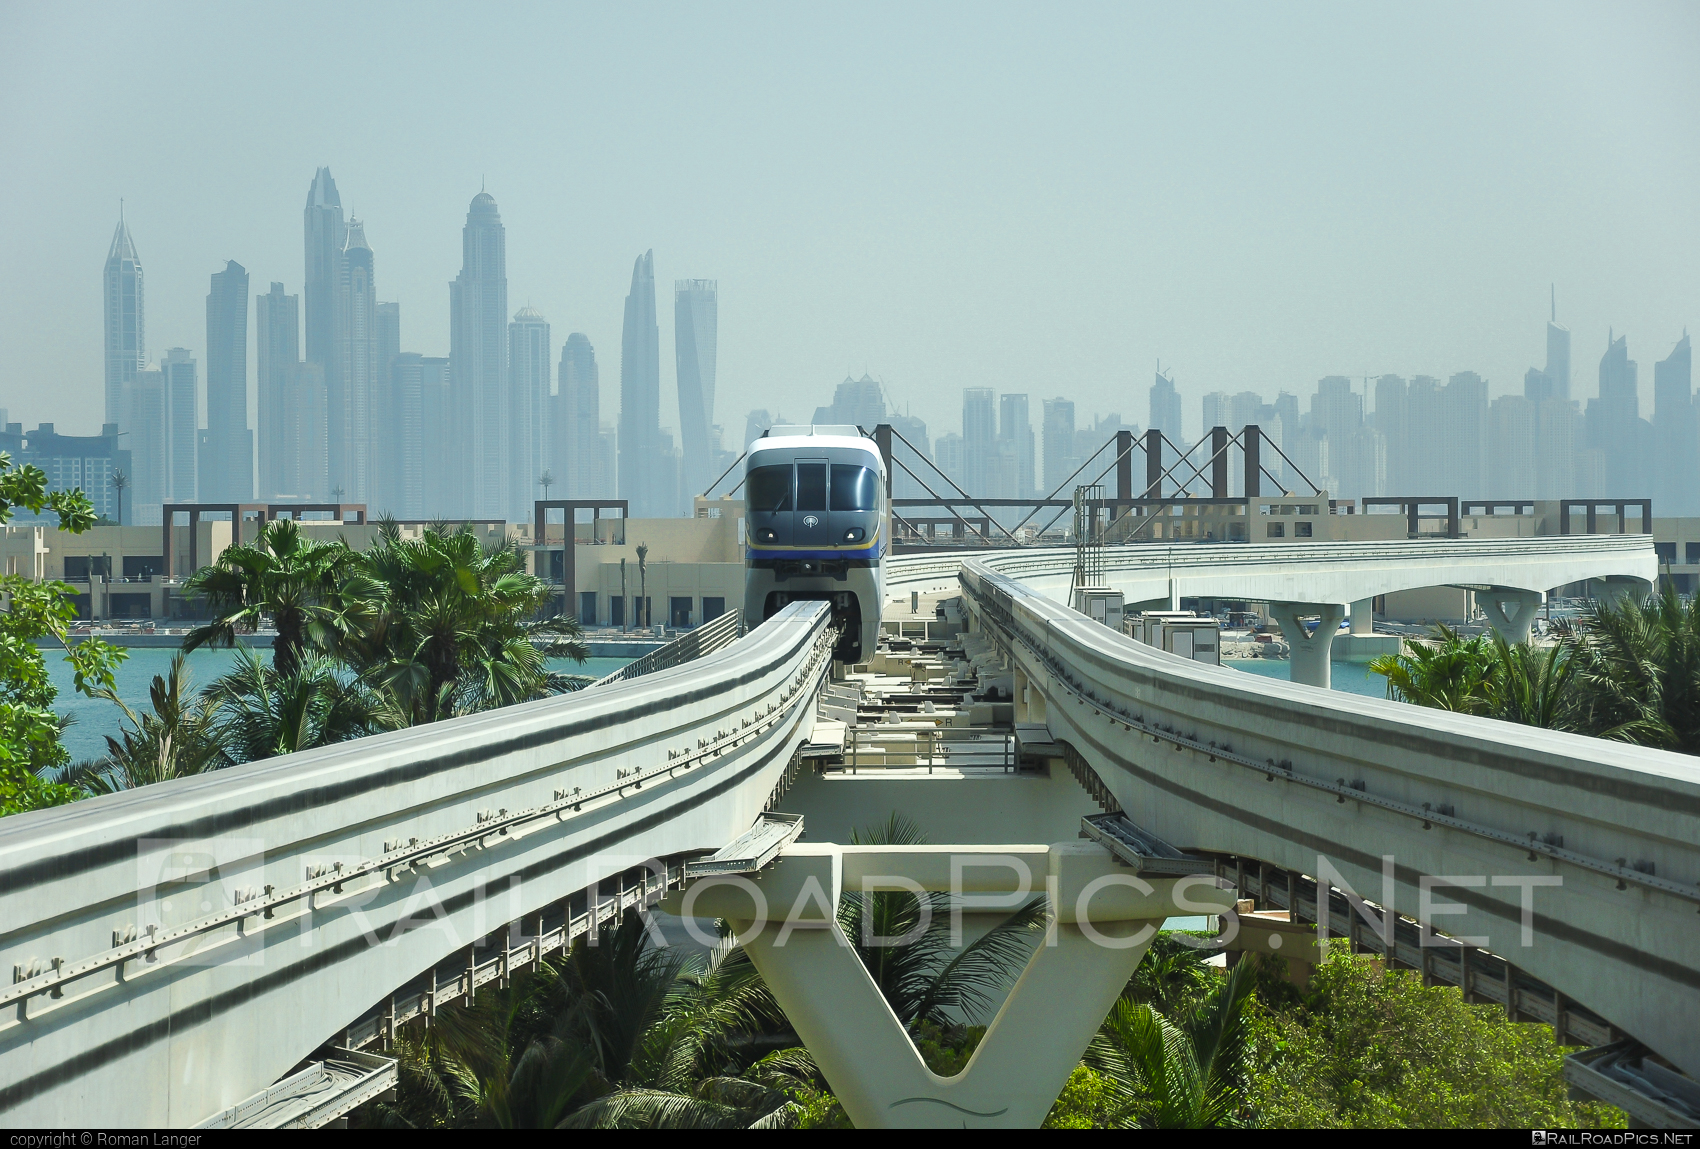 Hitachi Palm Jumeirah Monorail - Unknown vehicle ID operated by Serco Middle East #PalmJumeirahMonorail #SercoMiddleEast #bridge #hitachi #serco #sercogroup